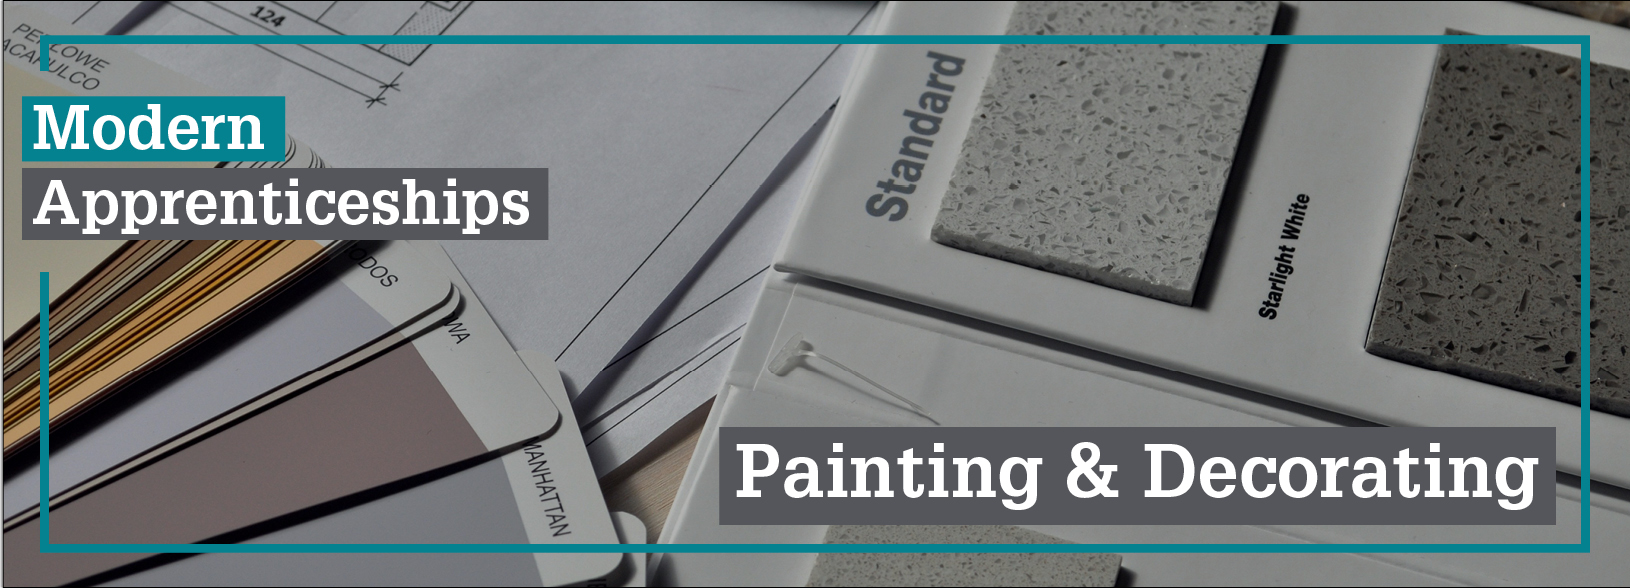 Modern Apprenticeship in Painting and Decorating